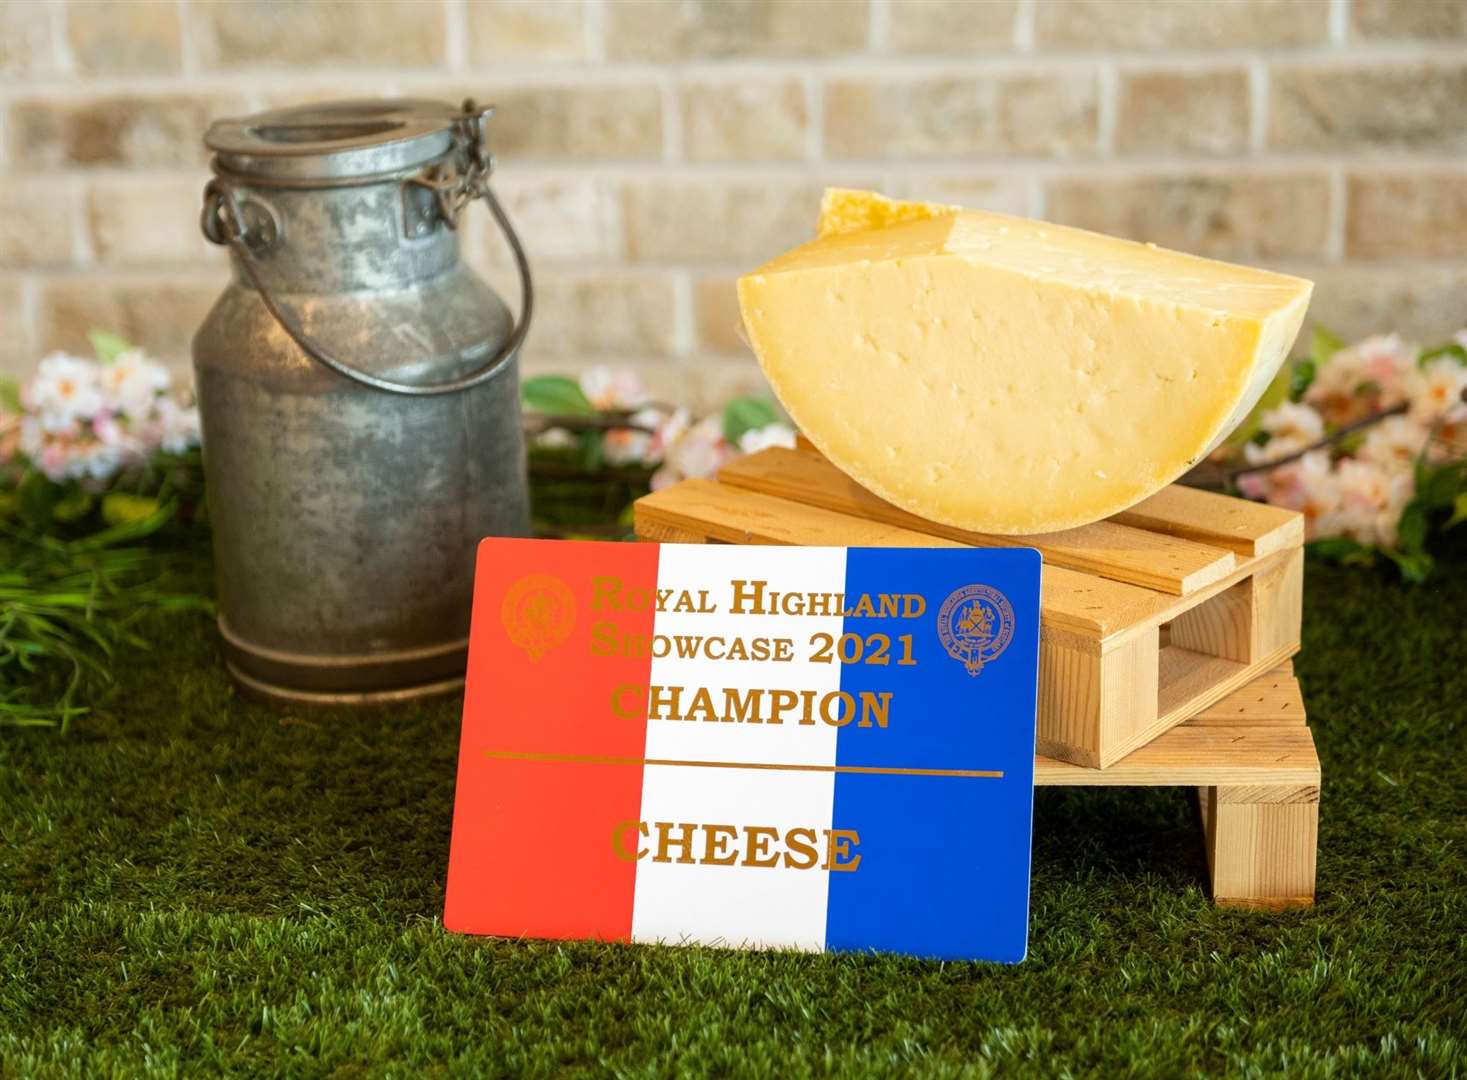 The RHS Cheese Champion in 2021